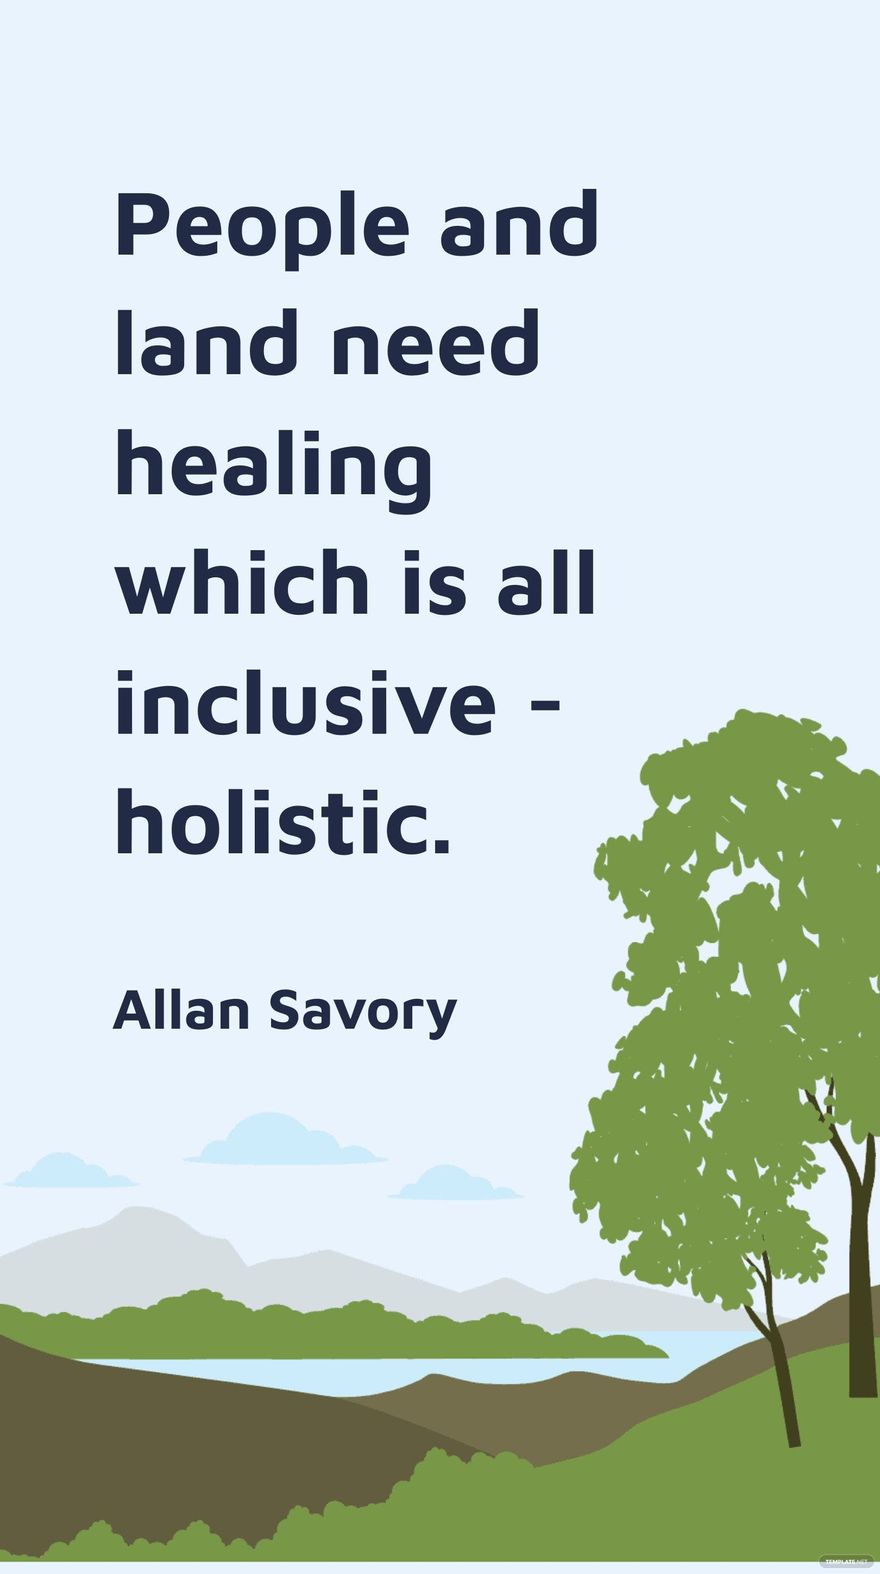 Allan Savory - People and land need healing which is all inclusive - holistic. in JPG